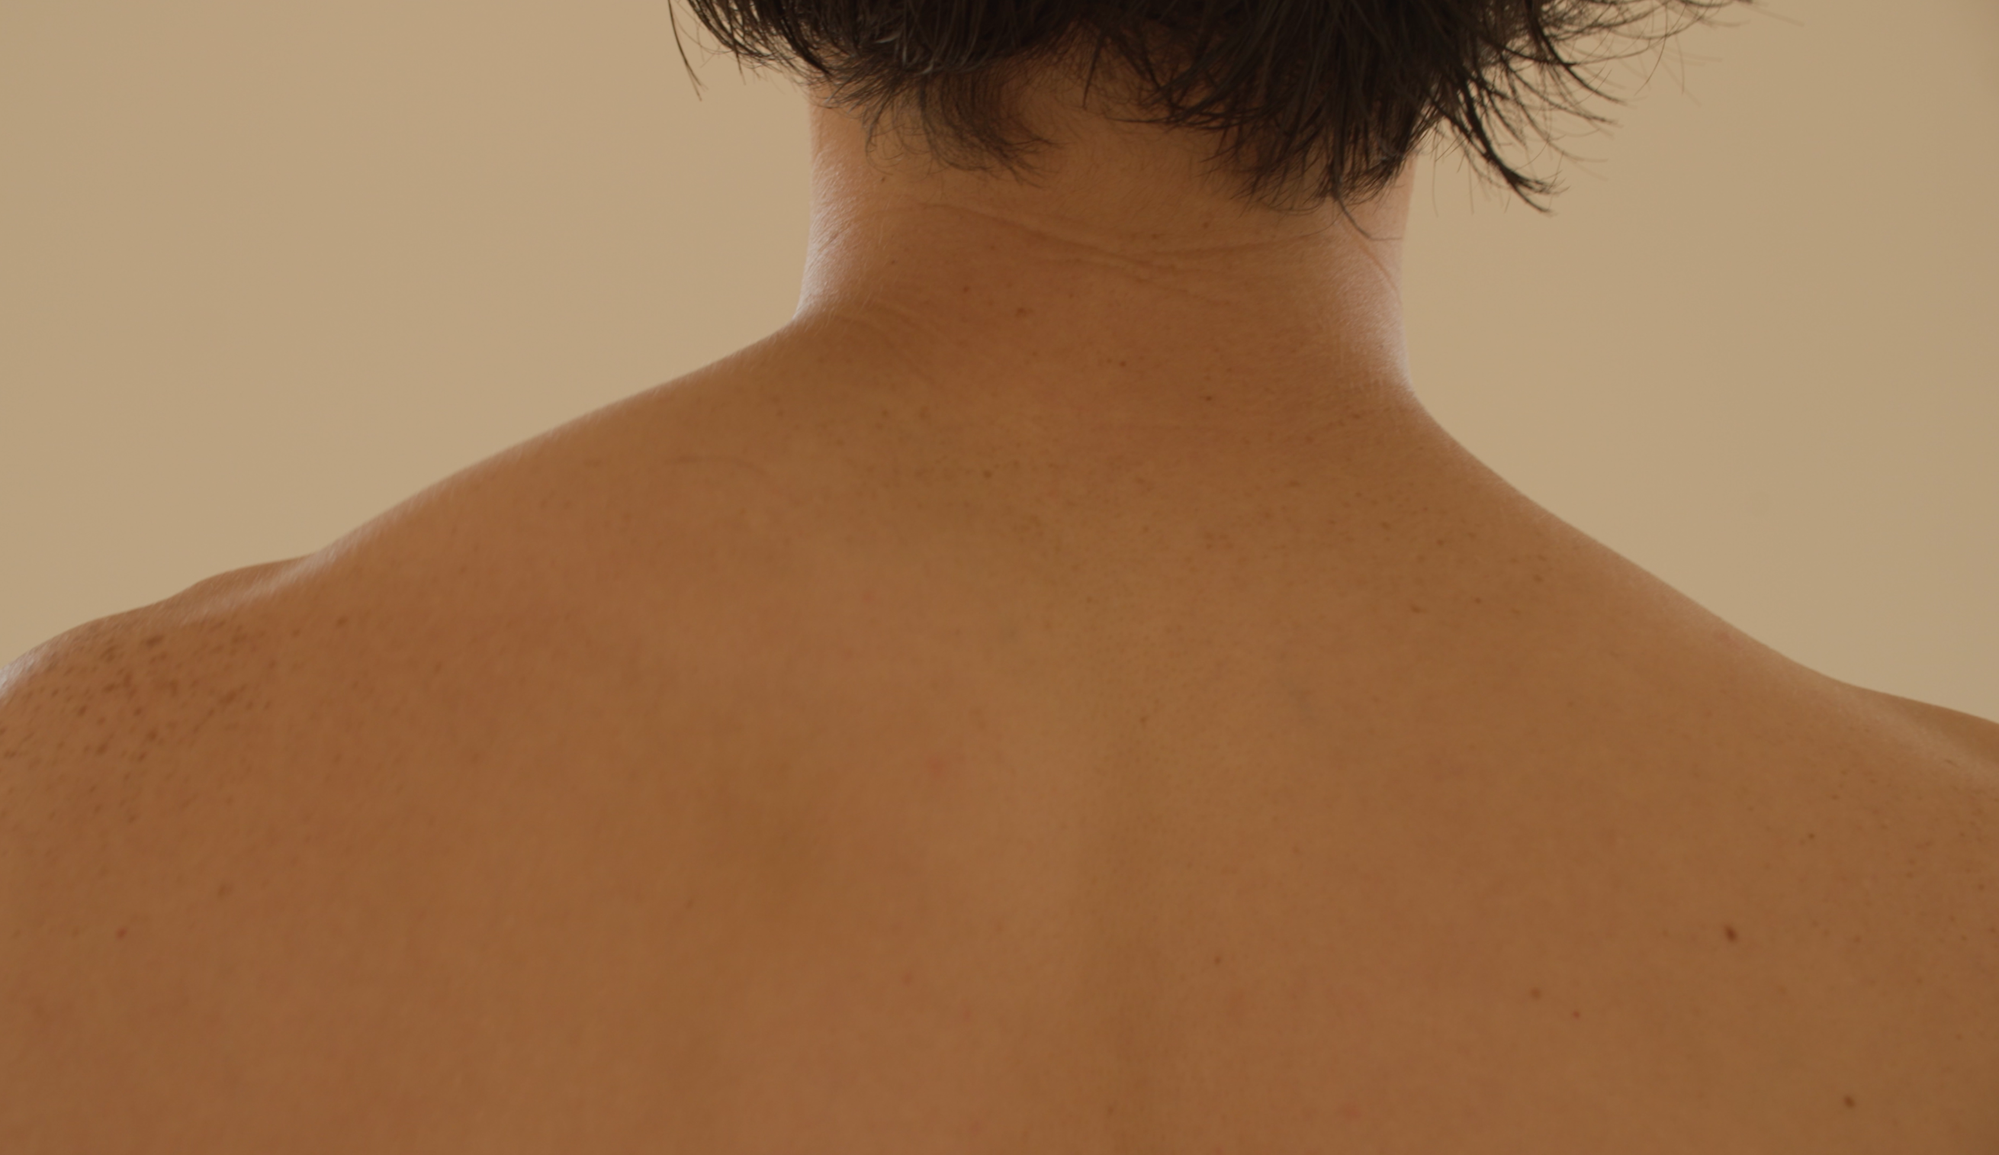 A posterior view of bare shoulders, which span the width of the image. The shoulders are muscular and golden-colored; they are sensual and inviting. A short crop of black hair falls just above the subject's neckline.